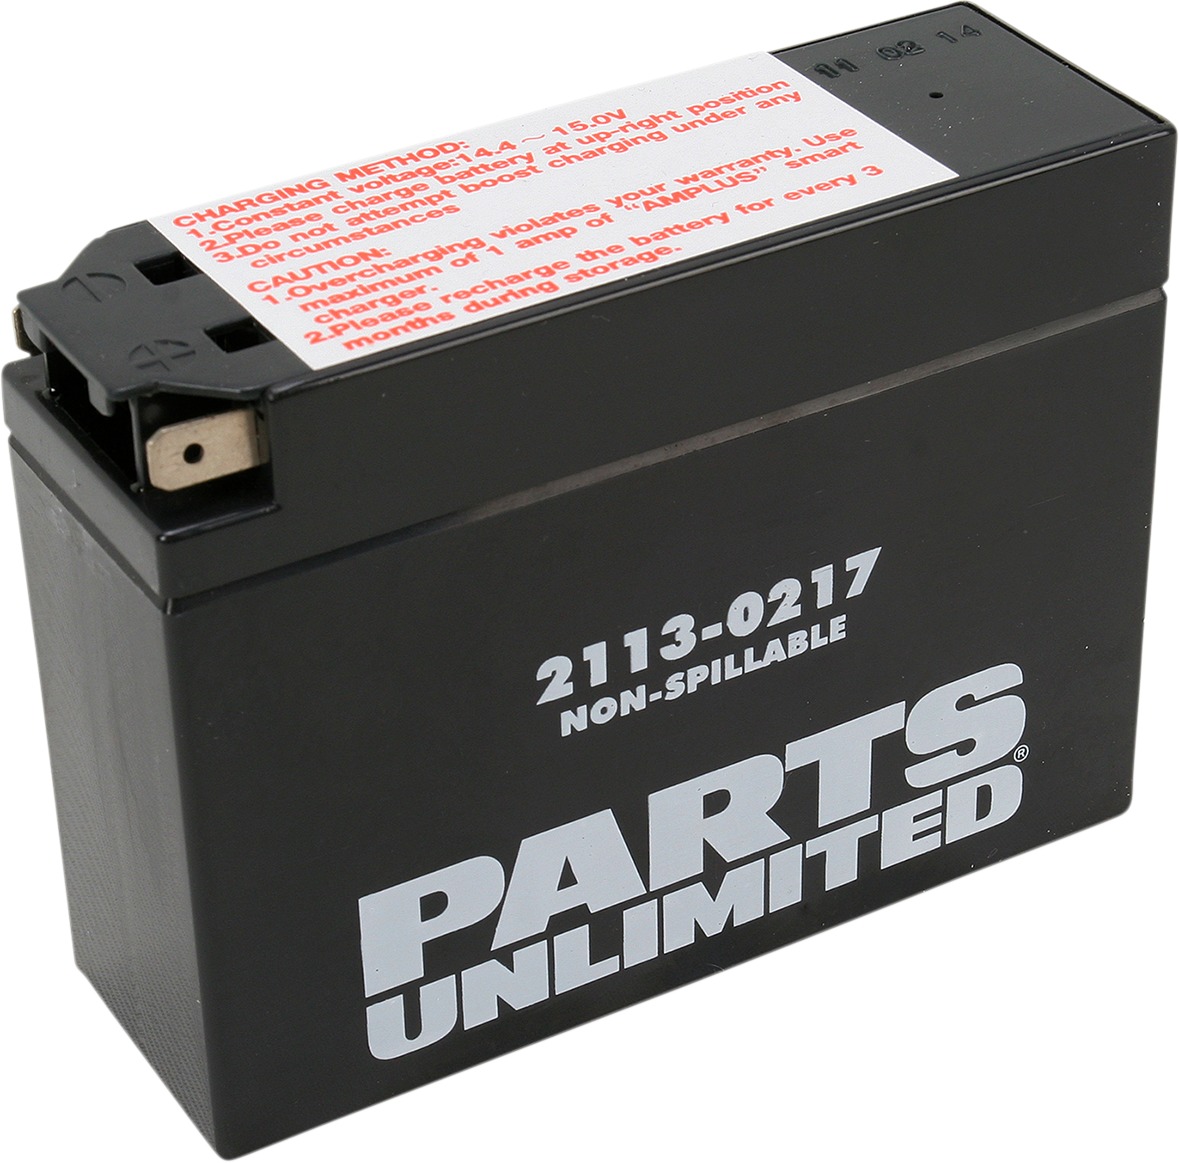 Factory Activated AGM Sealed Battery - Replaces YT4B-BS - Click Image to Close